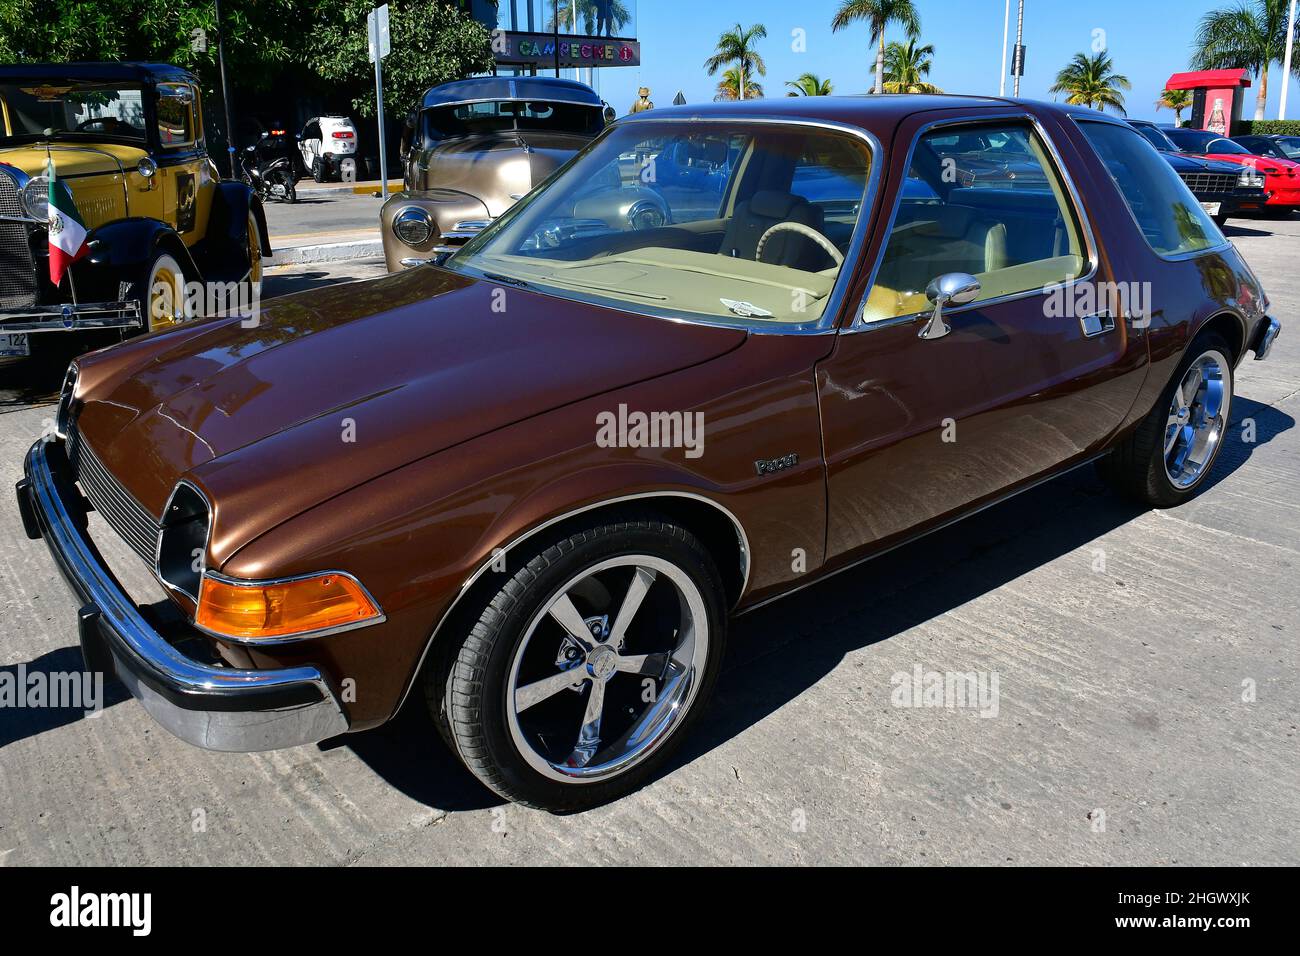 AMC Pacer vintage car, Mexico, North America Stock Photo